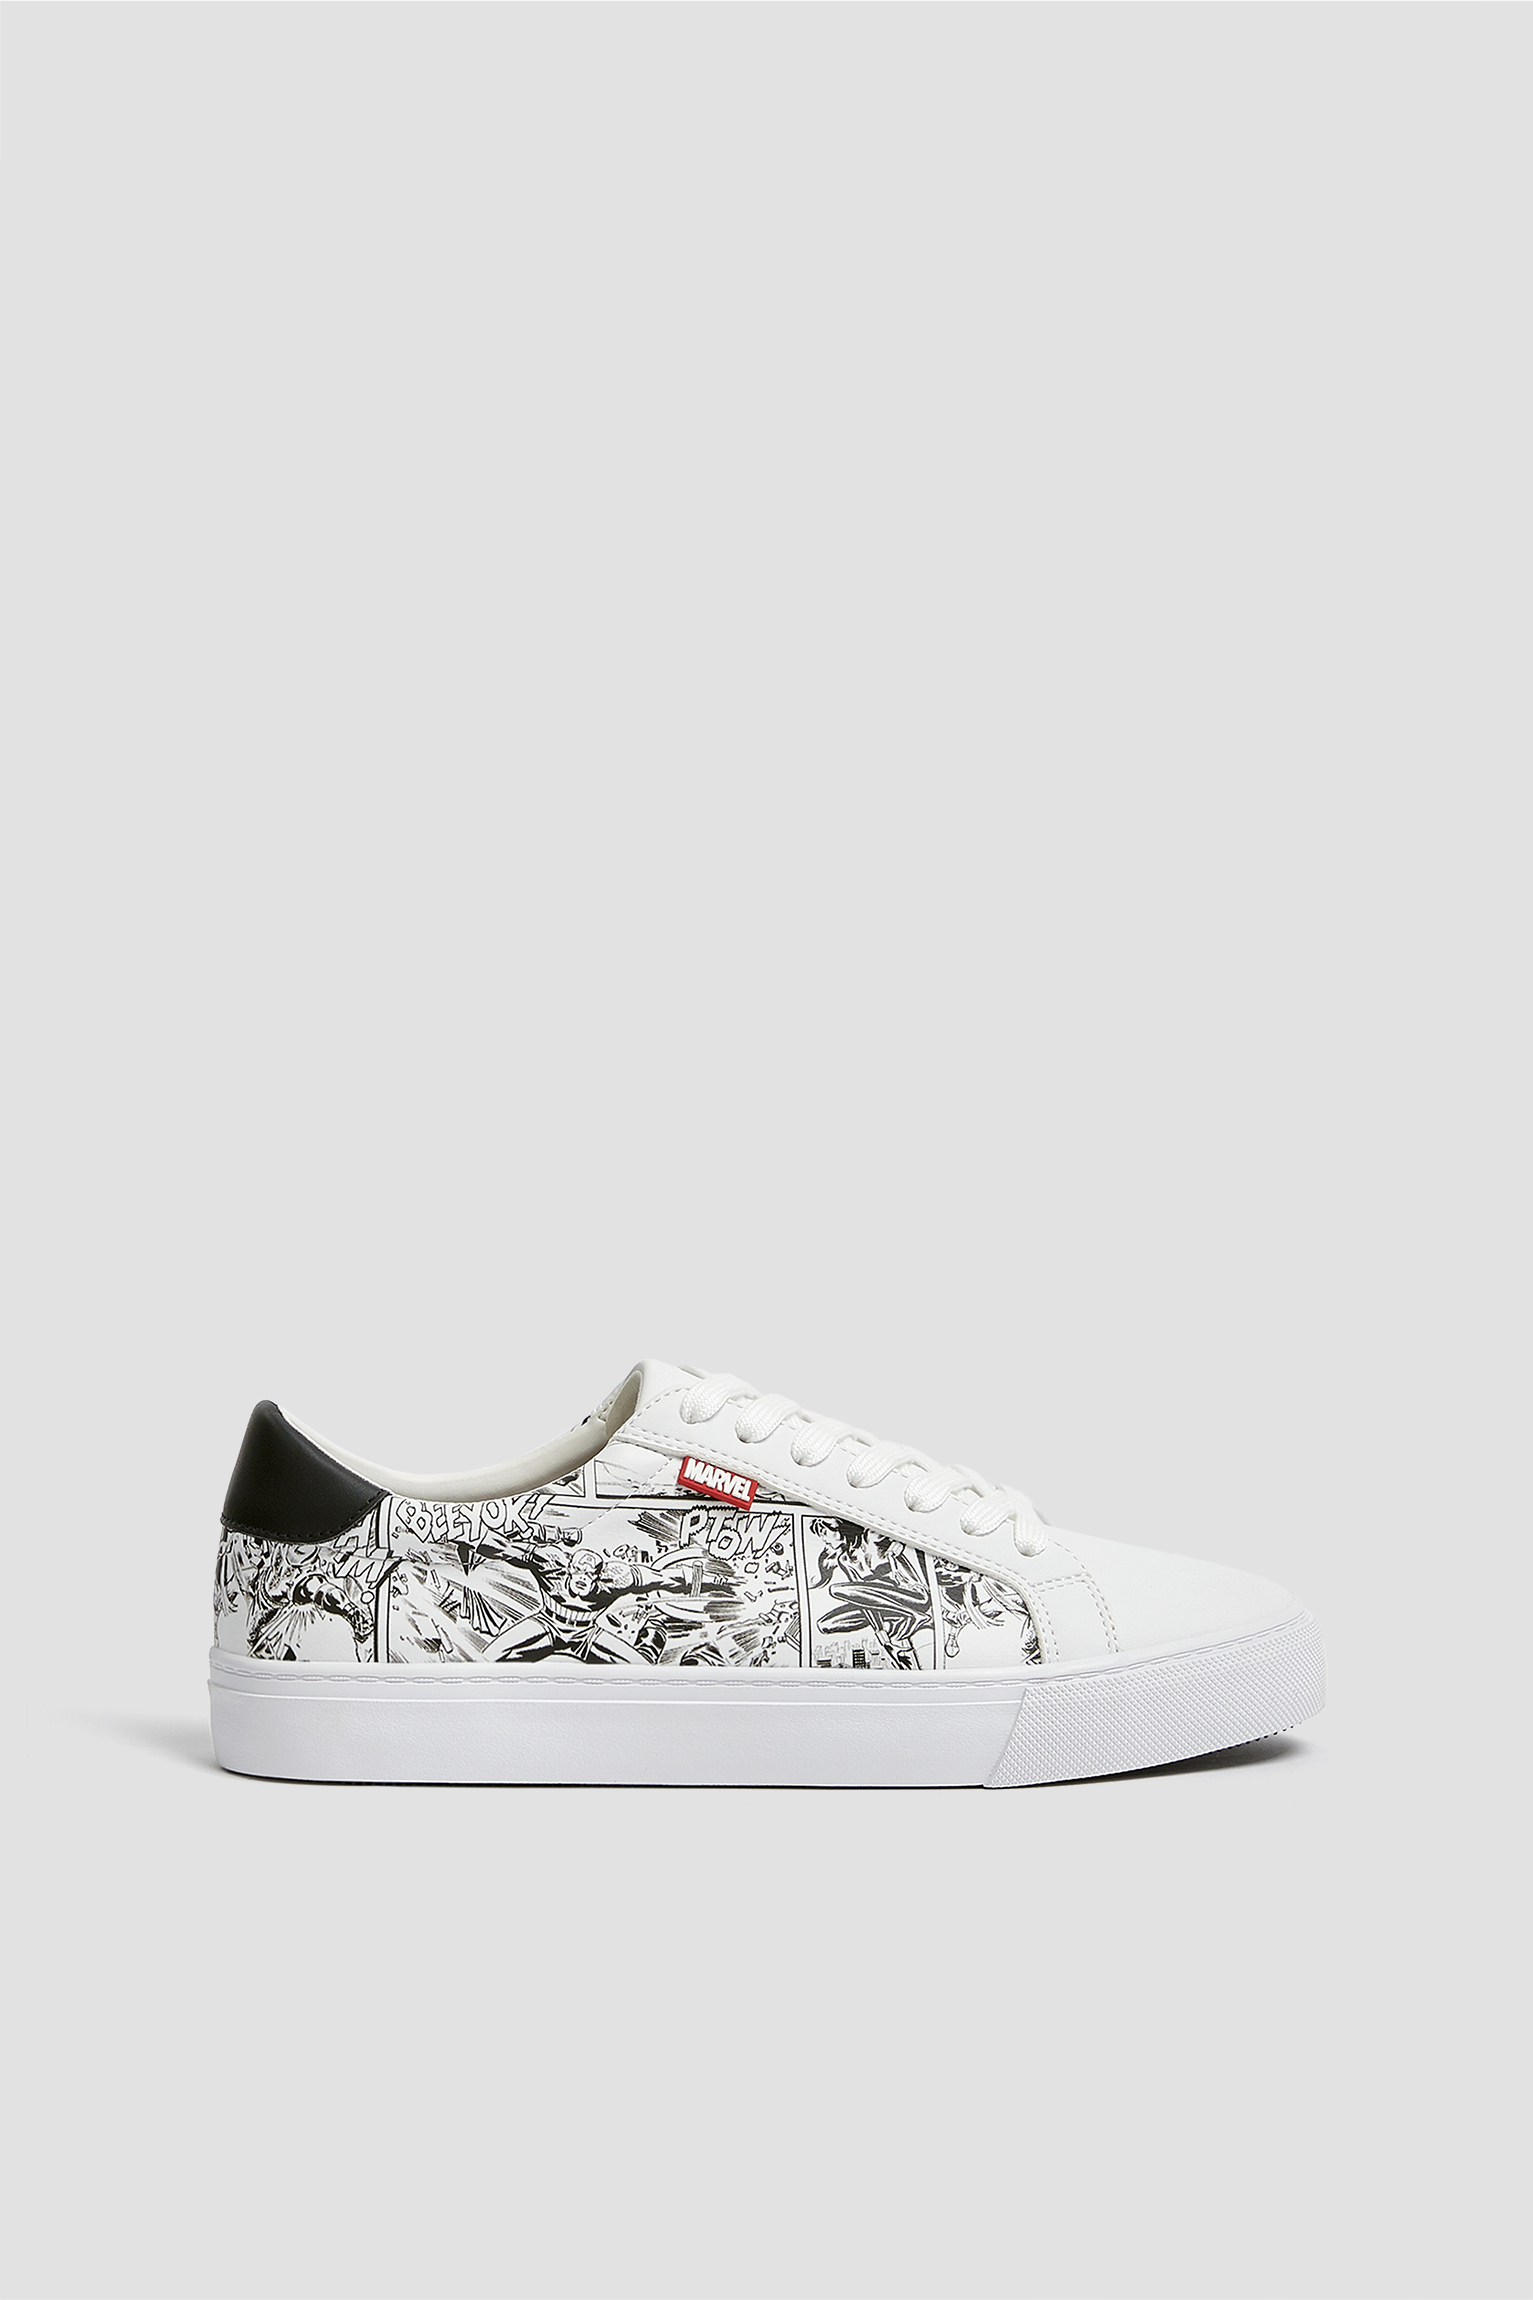 pull and bear white shoes